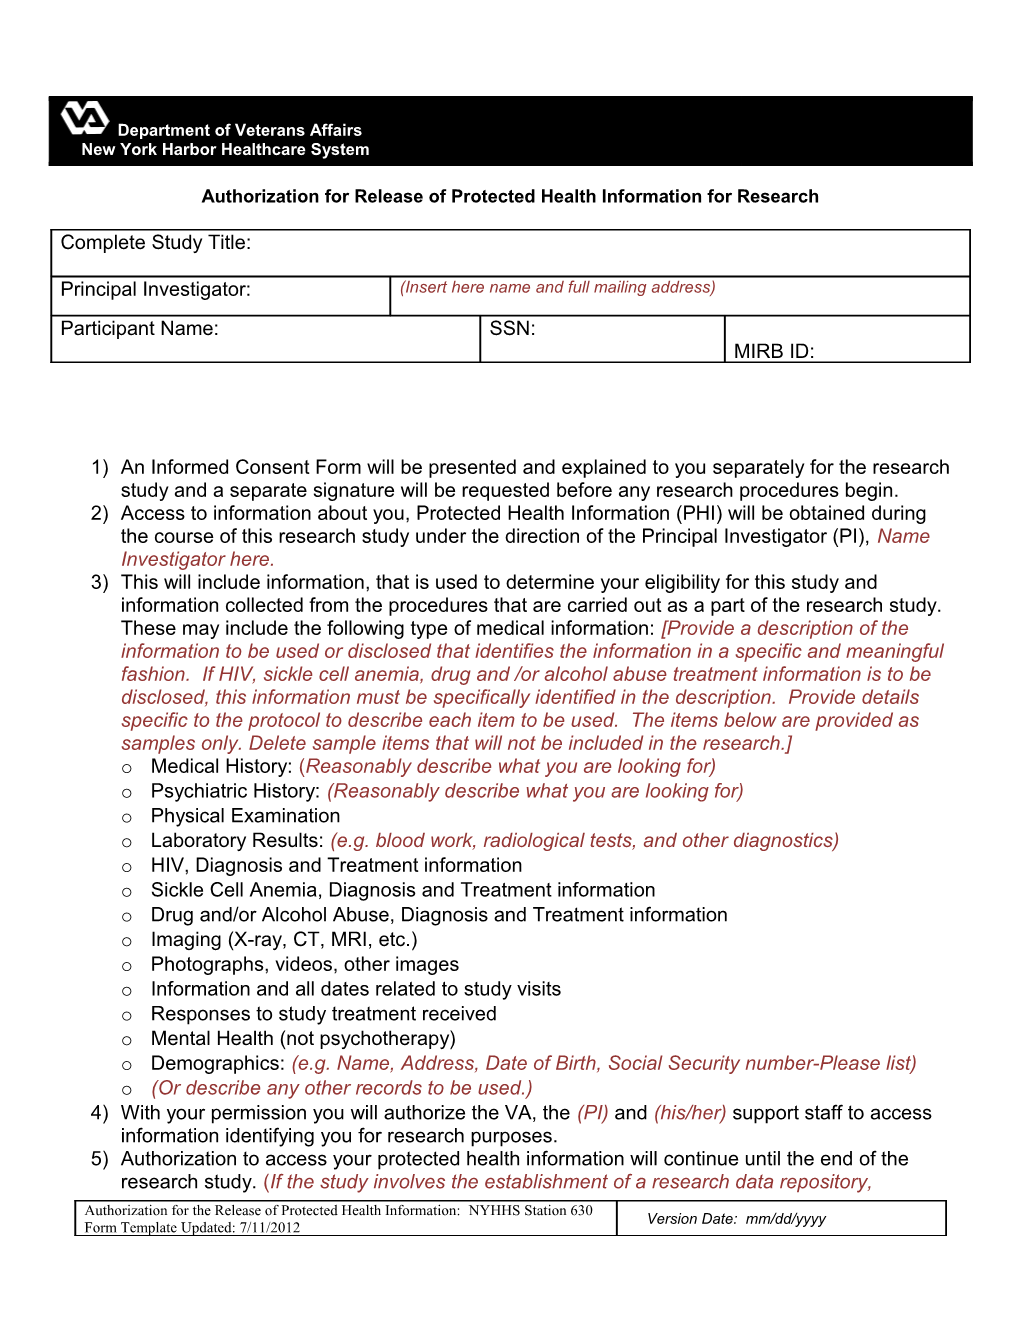 HIPAA Authorization For Research